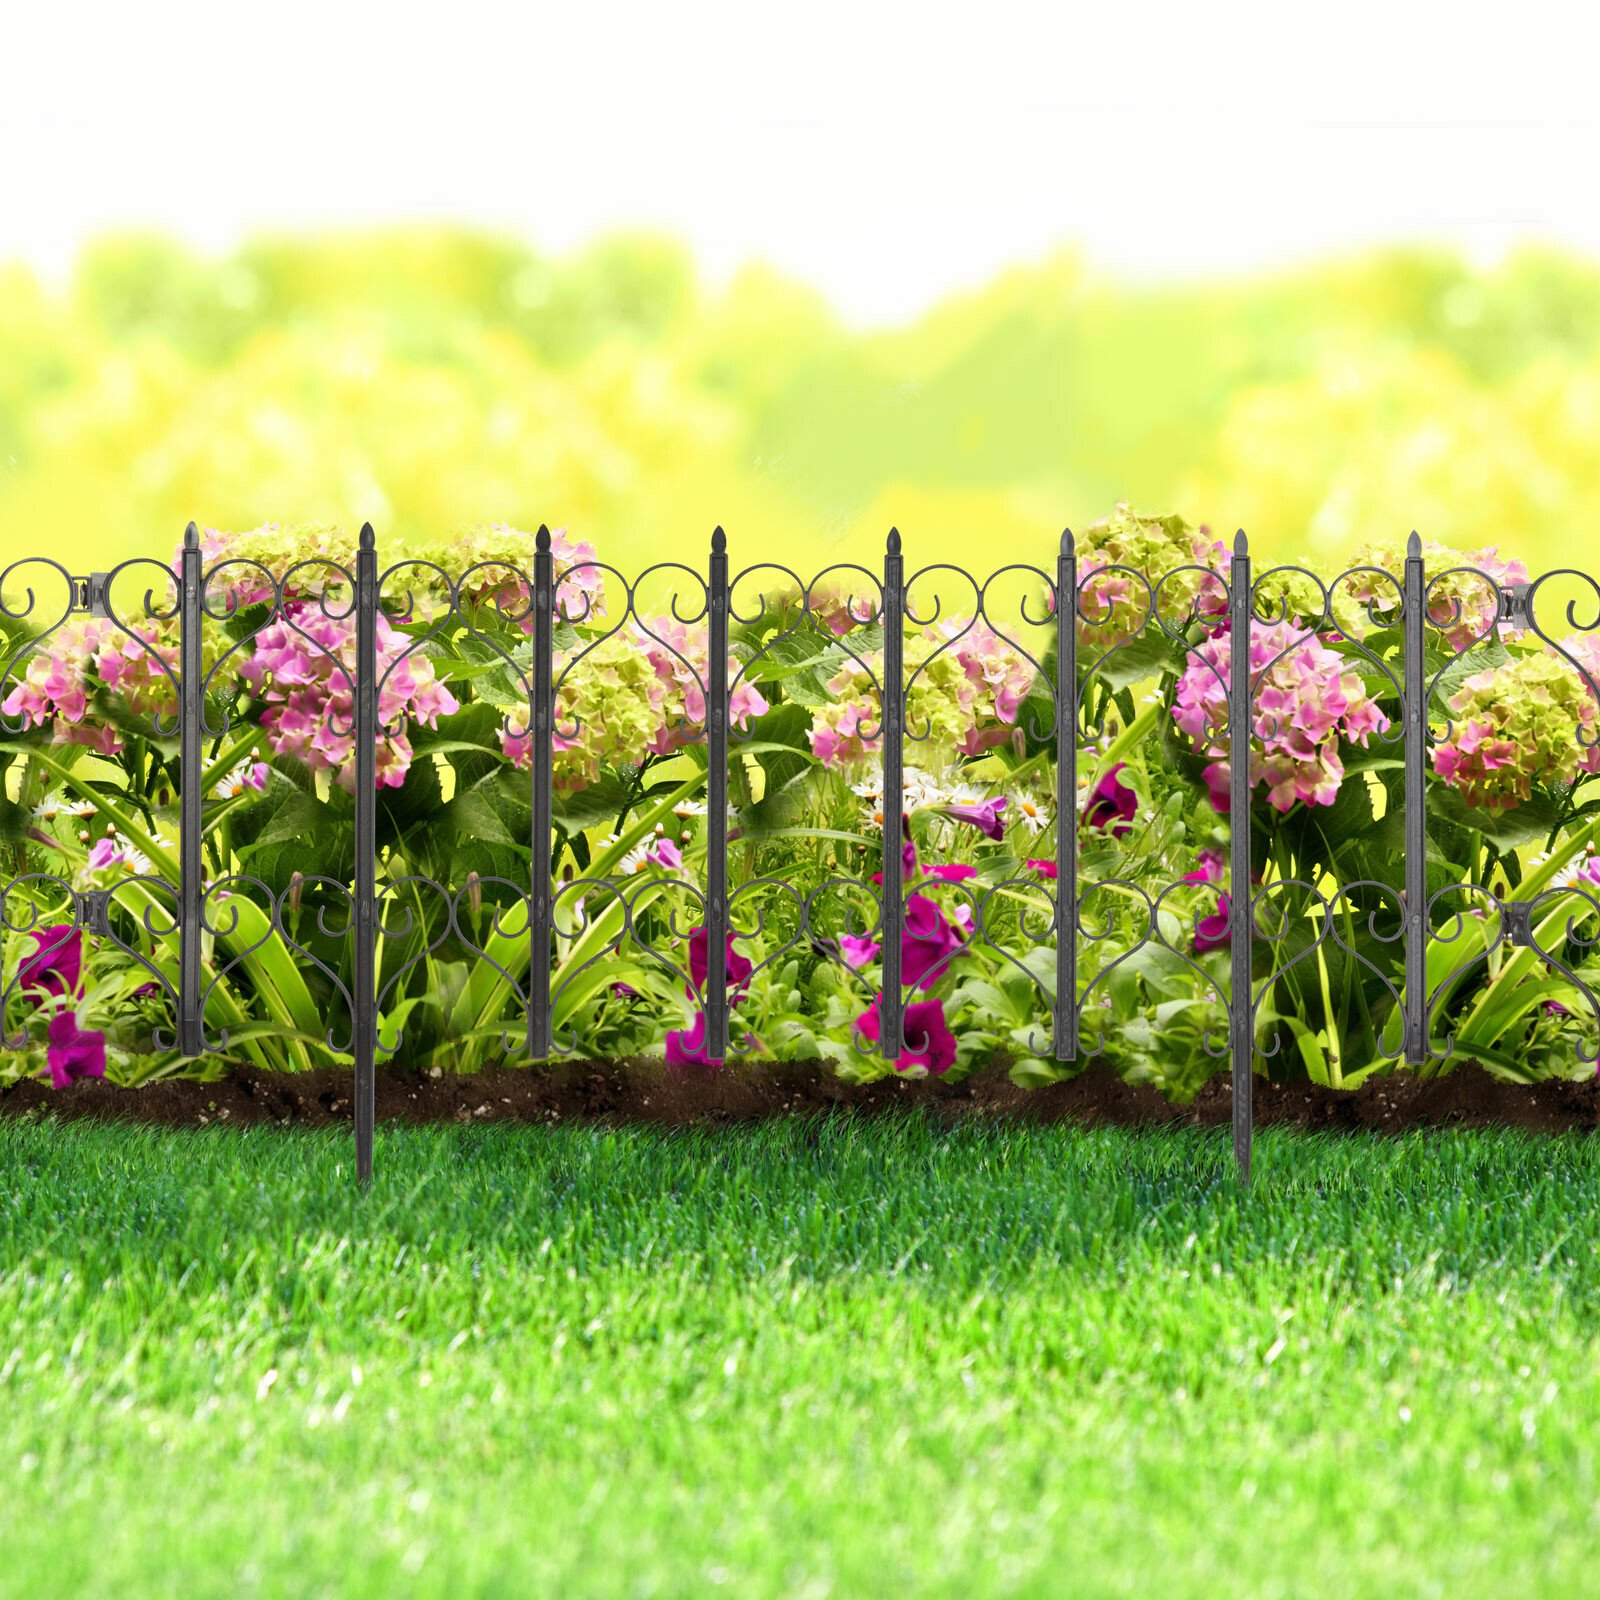 Flower bed border / fence thumb